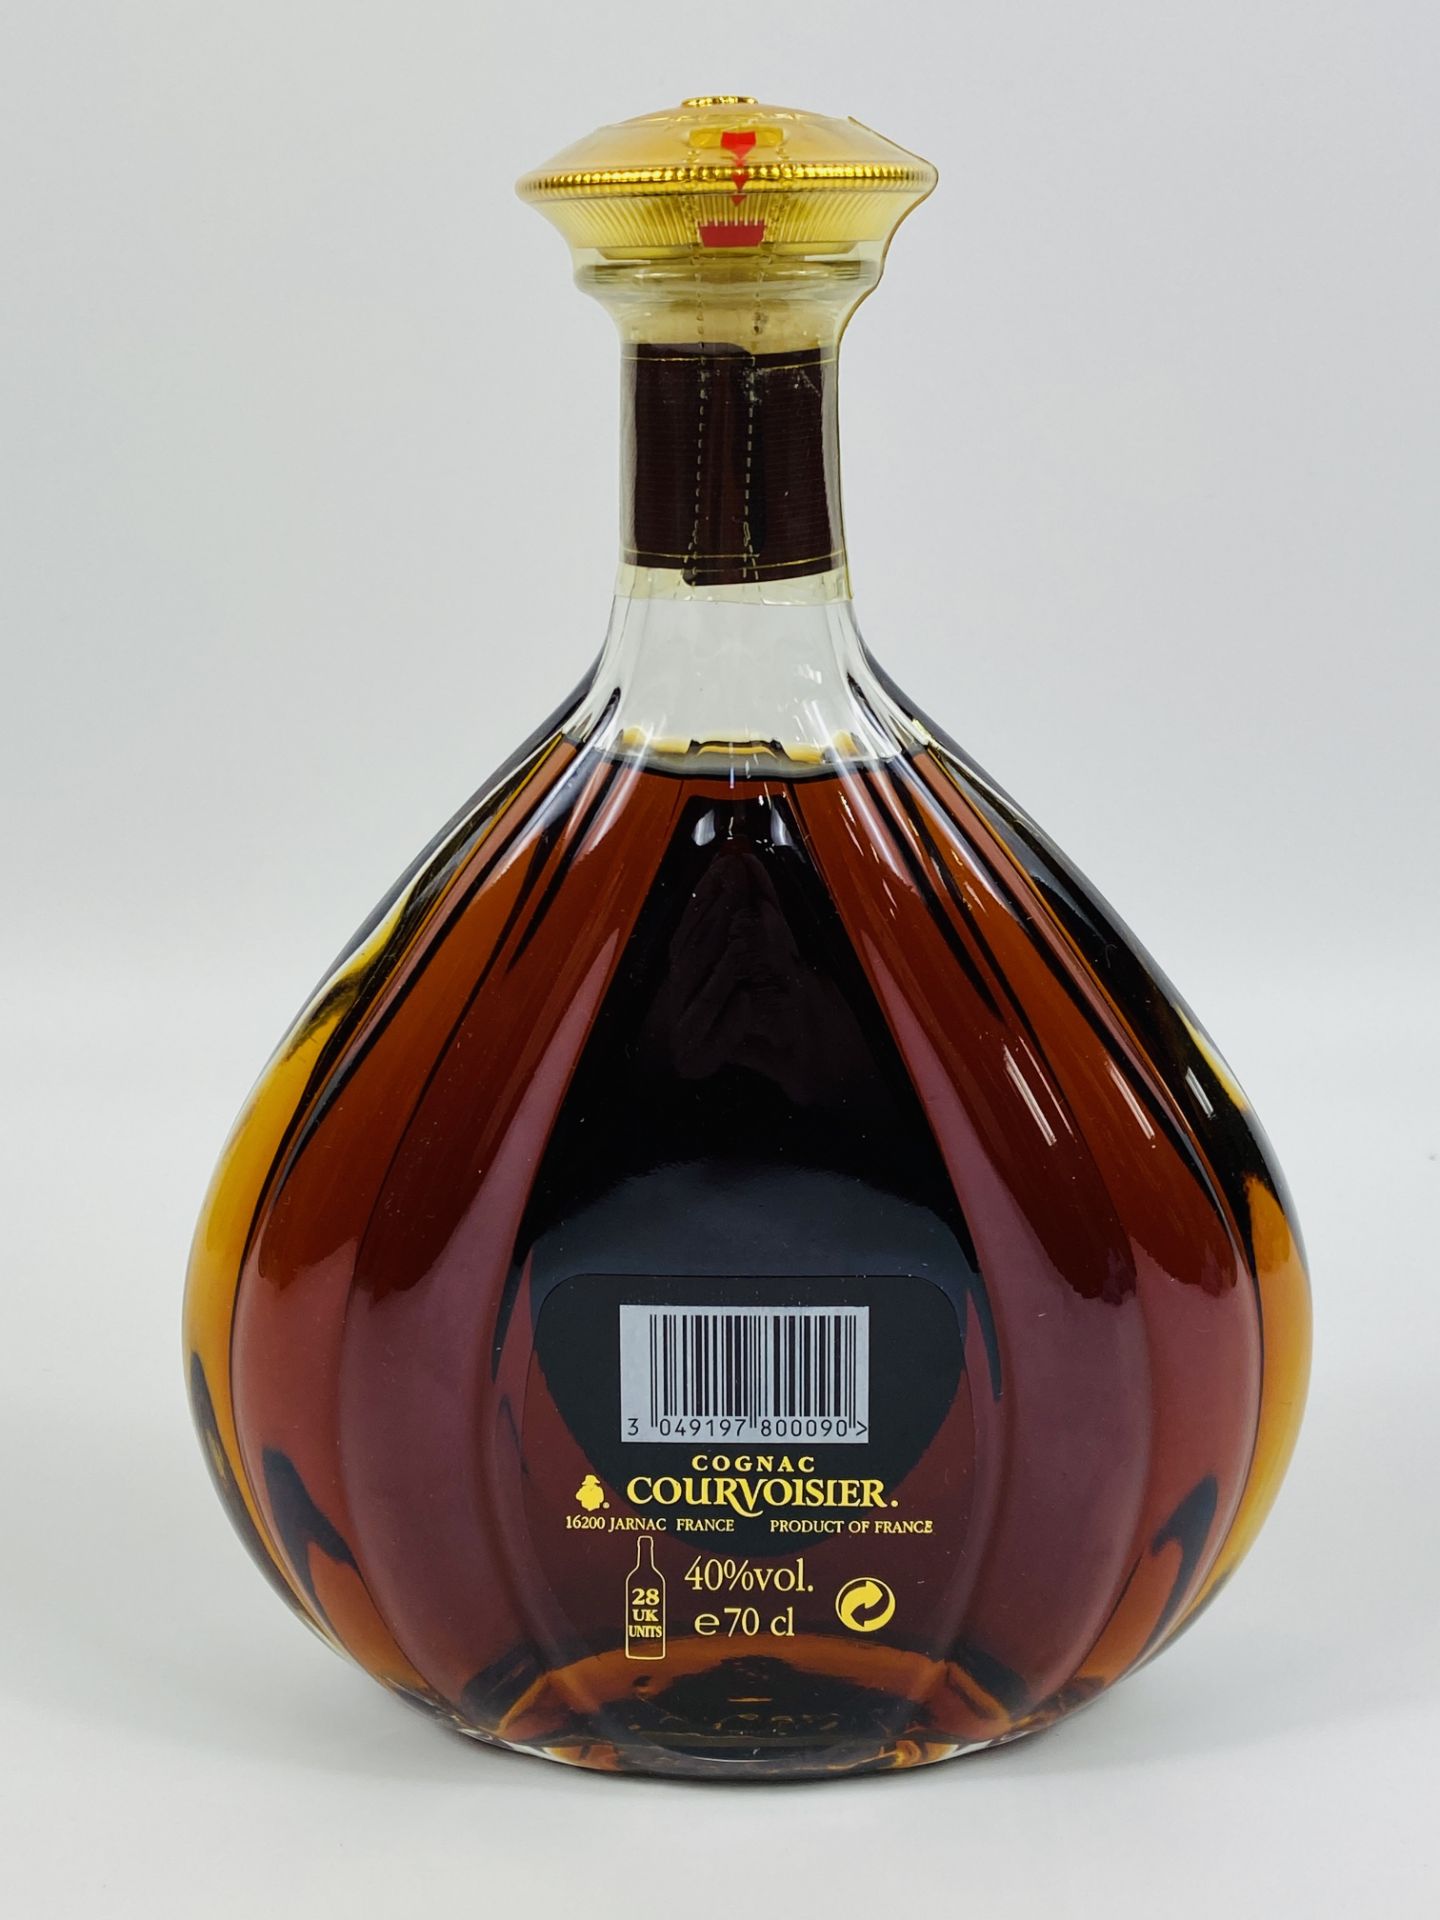 70cl bottle of Cognac Courvoisier XO Imperial in presentation box - Image 3 of 4